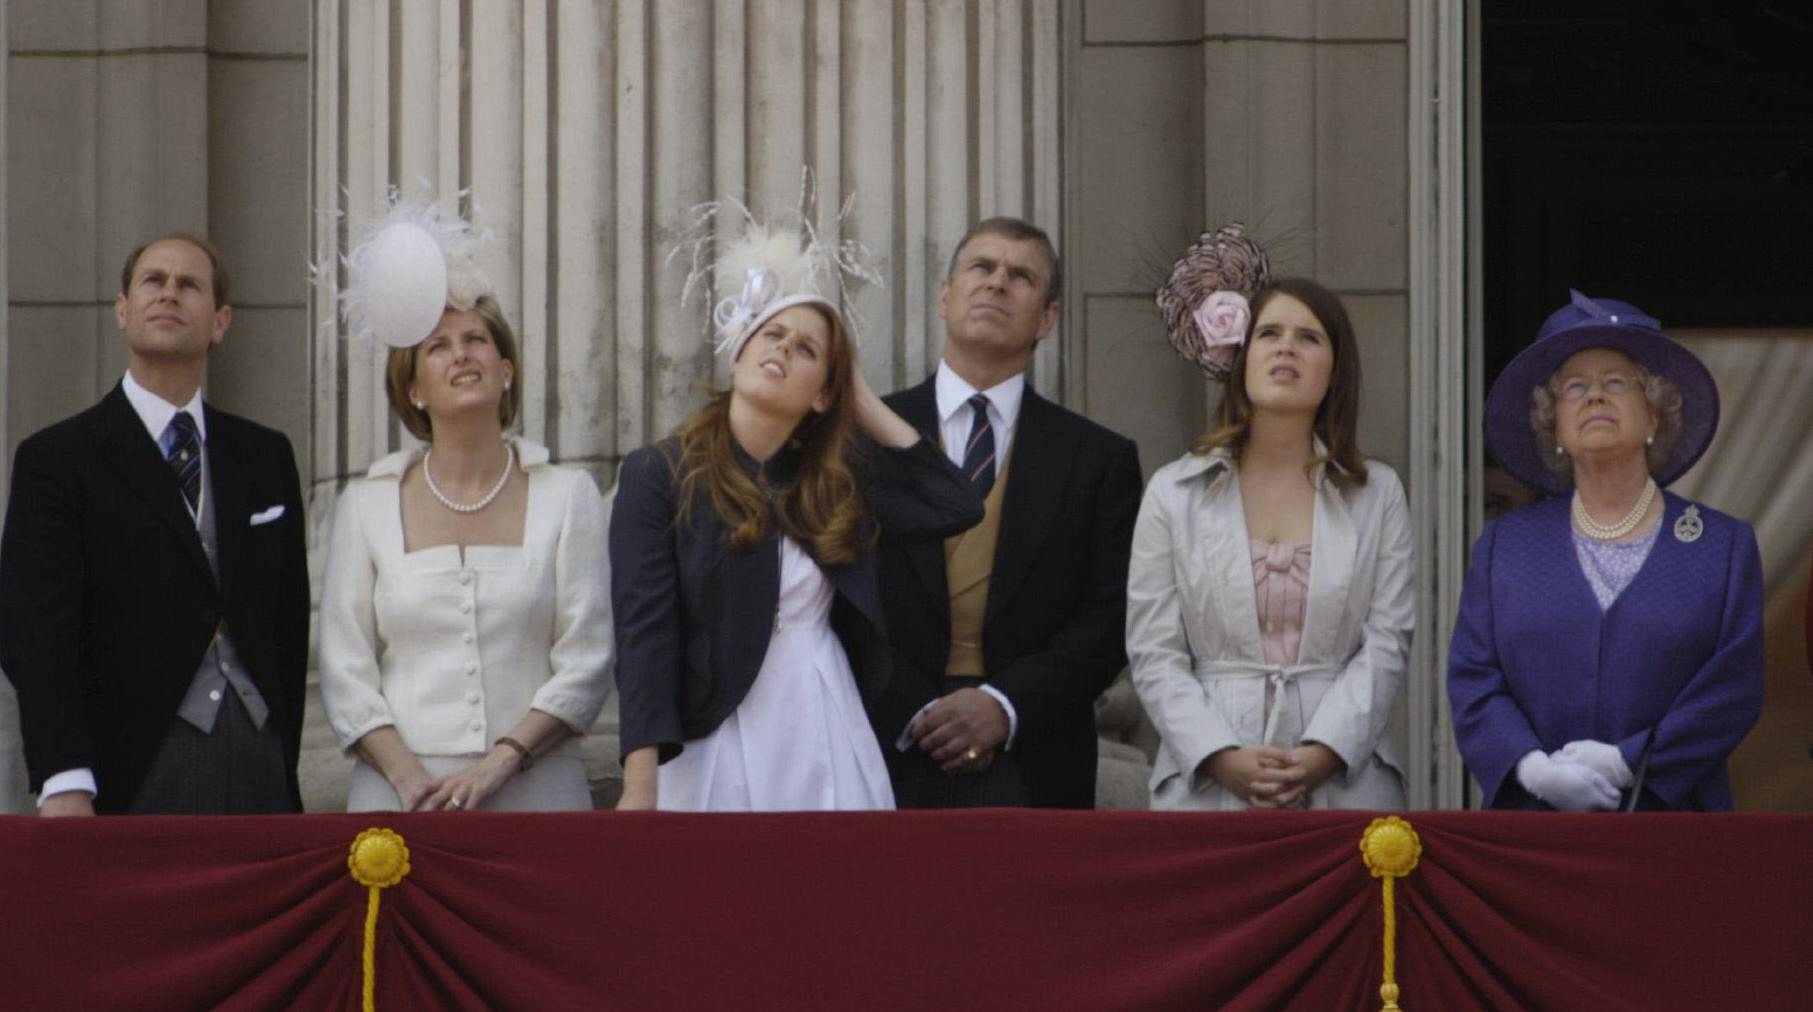 Prince Edward, the Countess of Wessex, Princess Beatrice, Prince Andrew, Princess Eugenie and Queen Elizabeth II